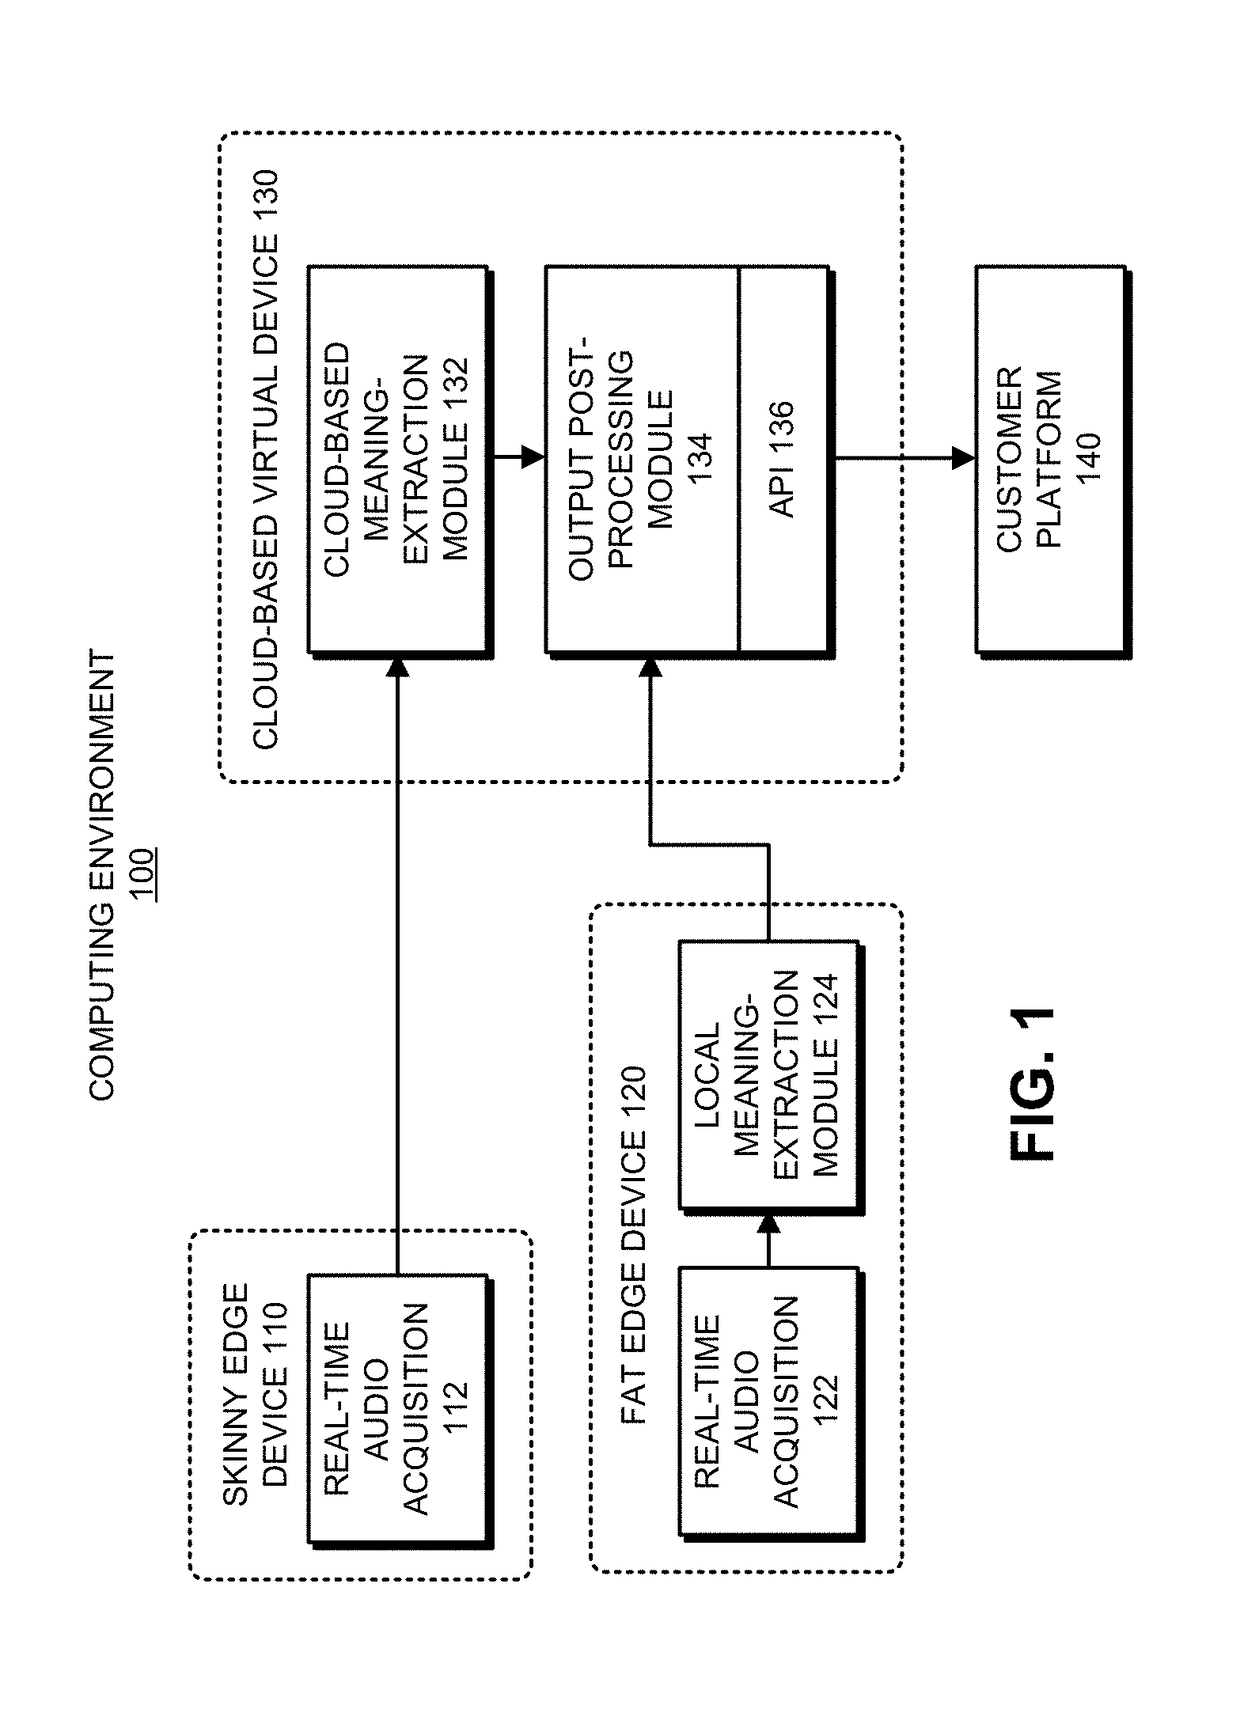 Sound-recognition system based on a sound language and associated annotations